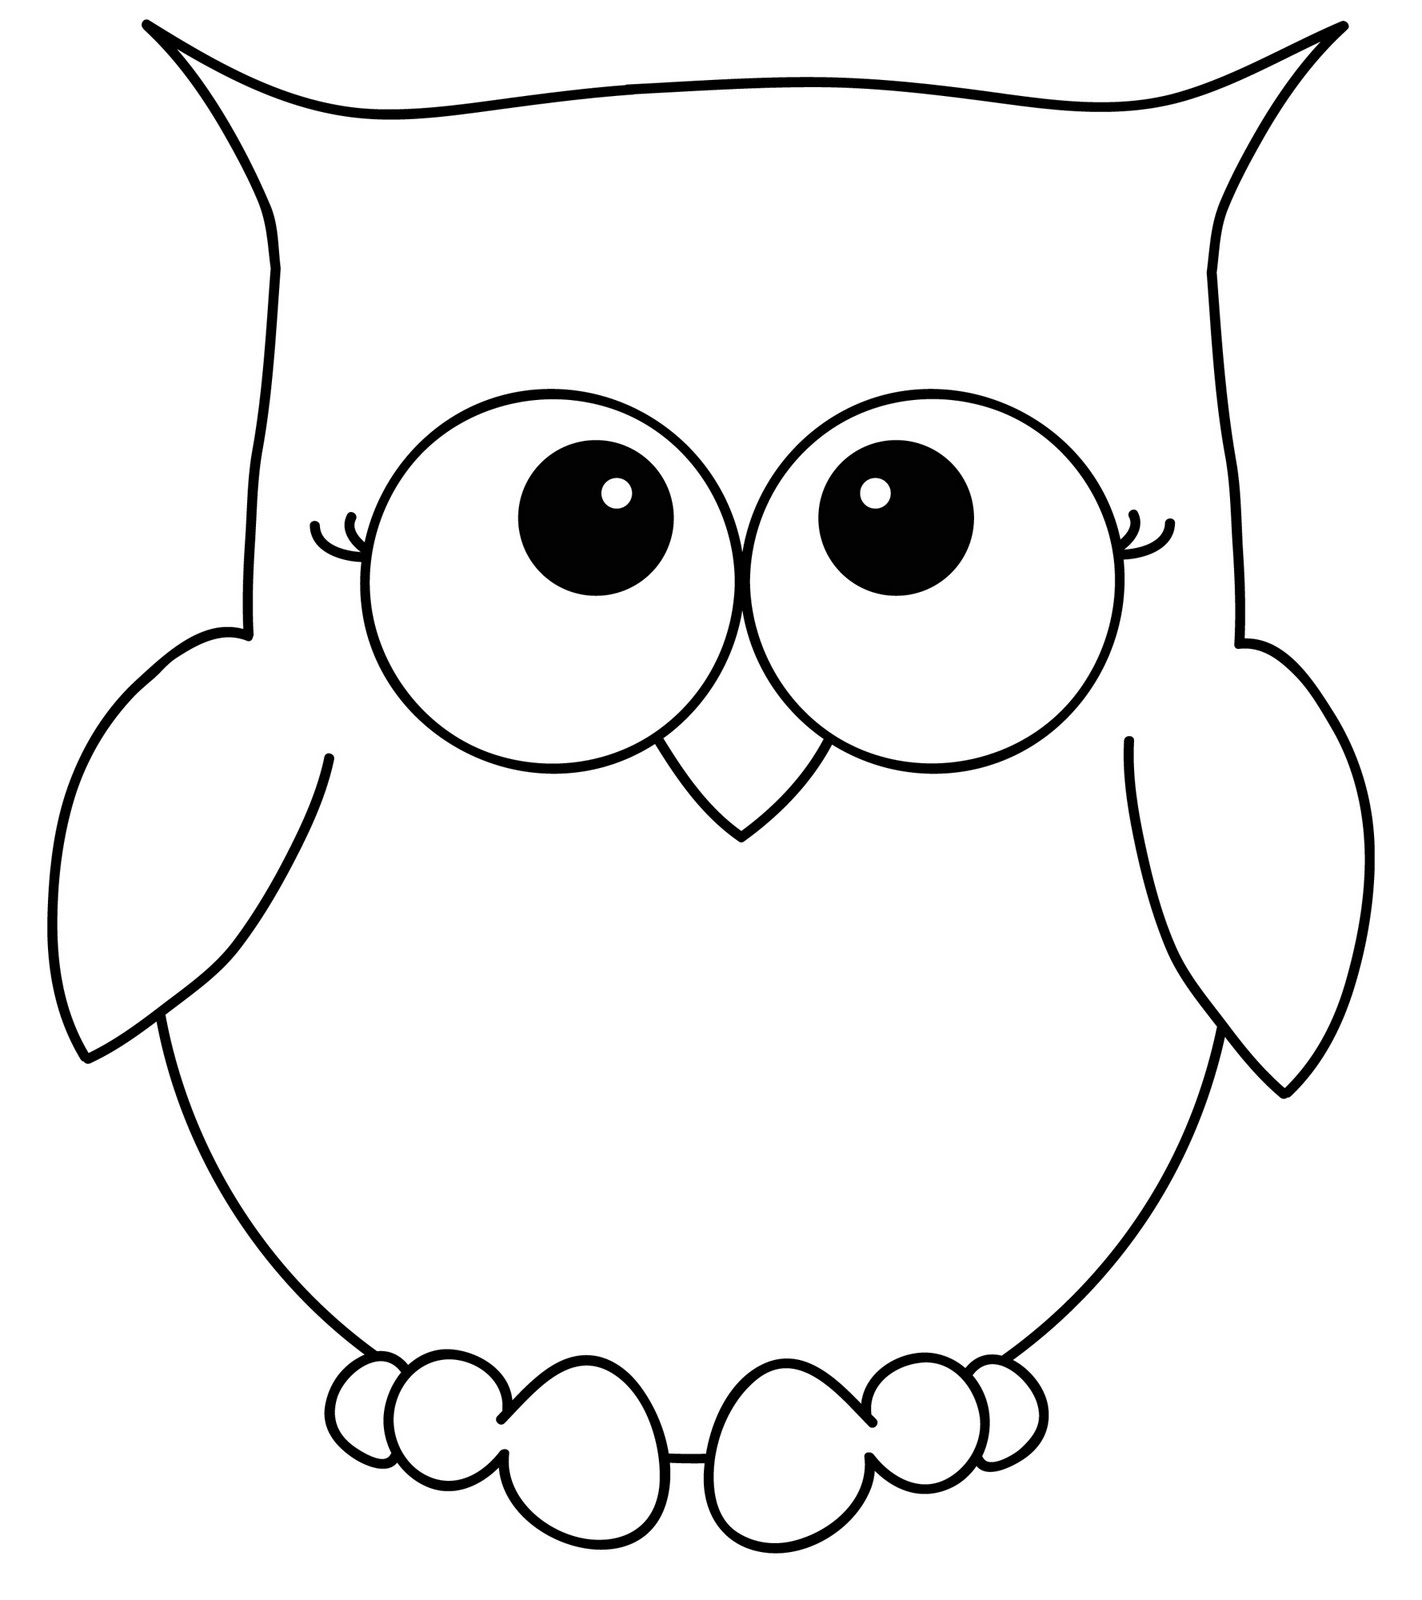 Cartoon Owl Coloring Pages #3955